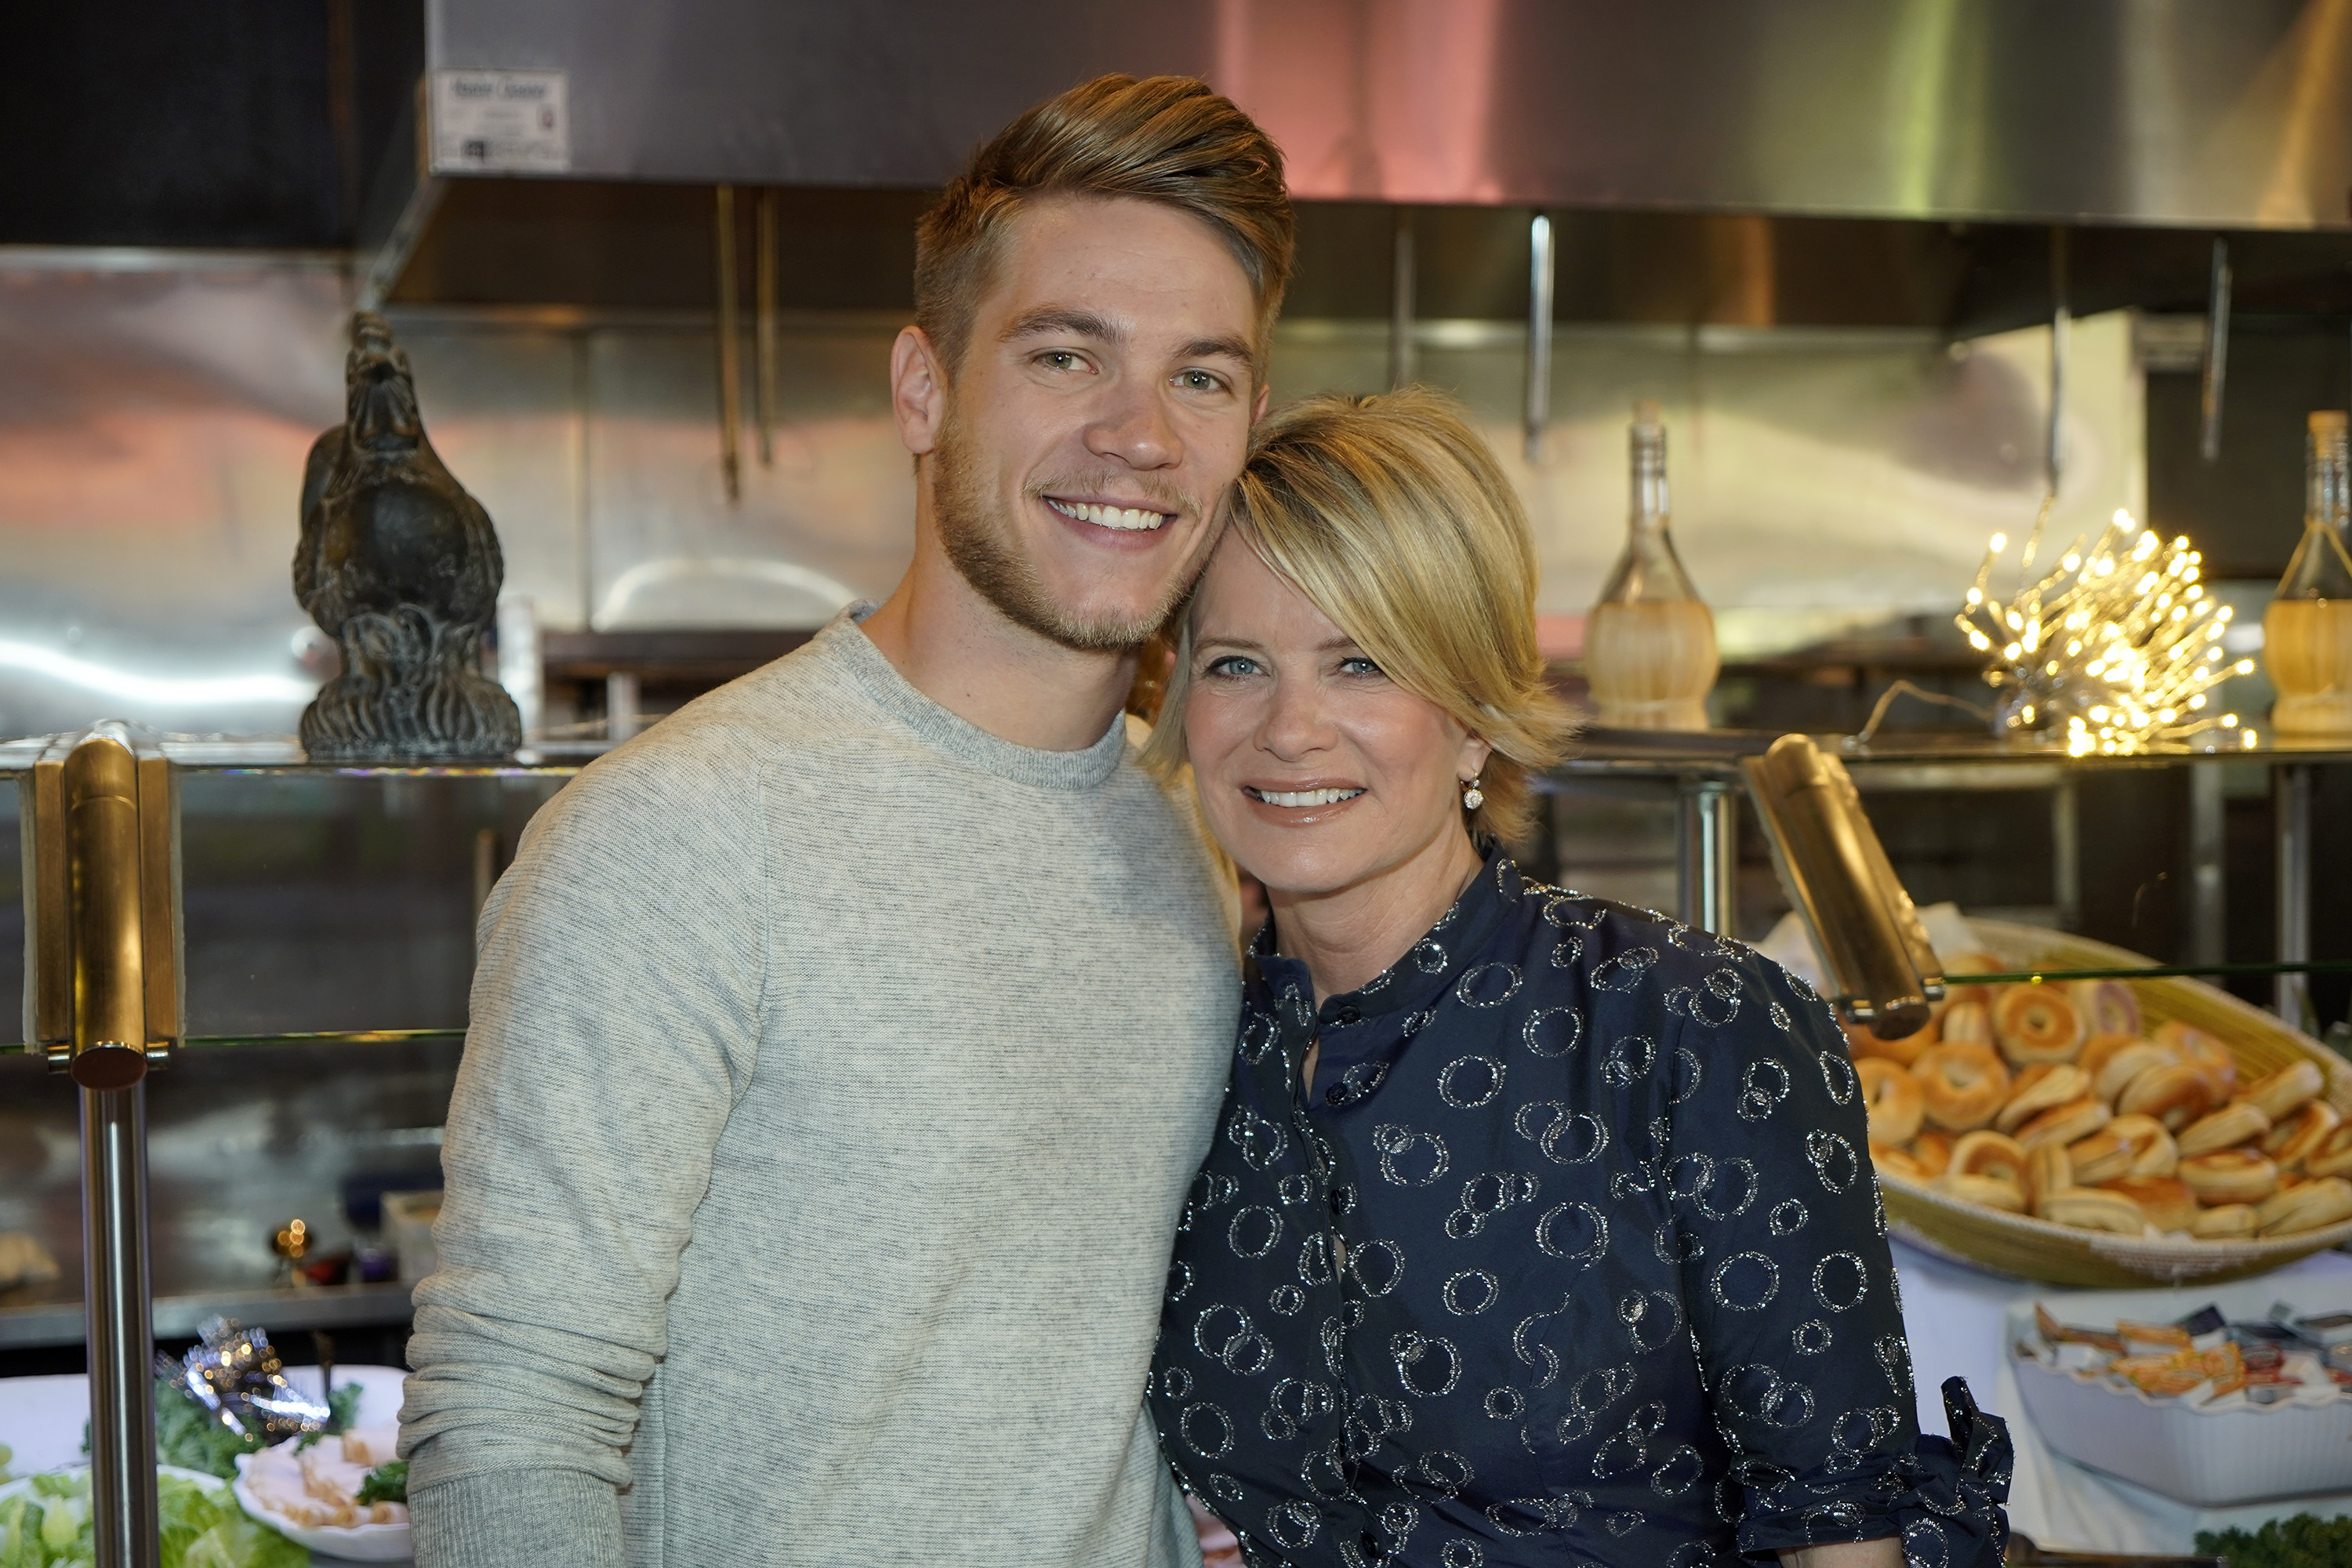 'Days of Our Lives' actors Lucas Adams and Mary Beth Evans posing together in a kitchen.